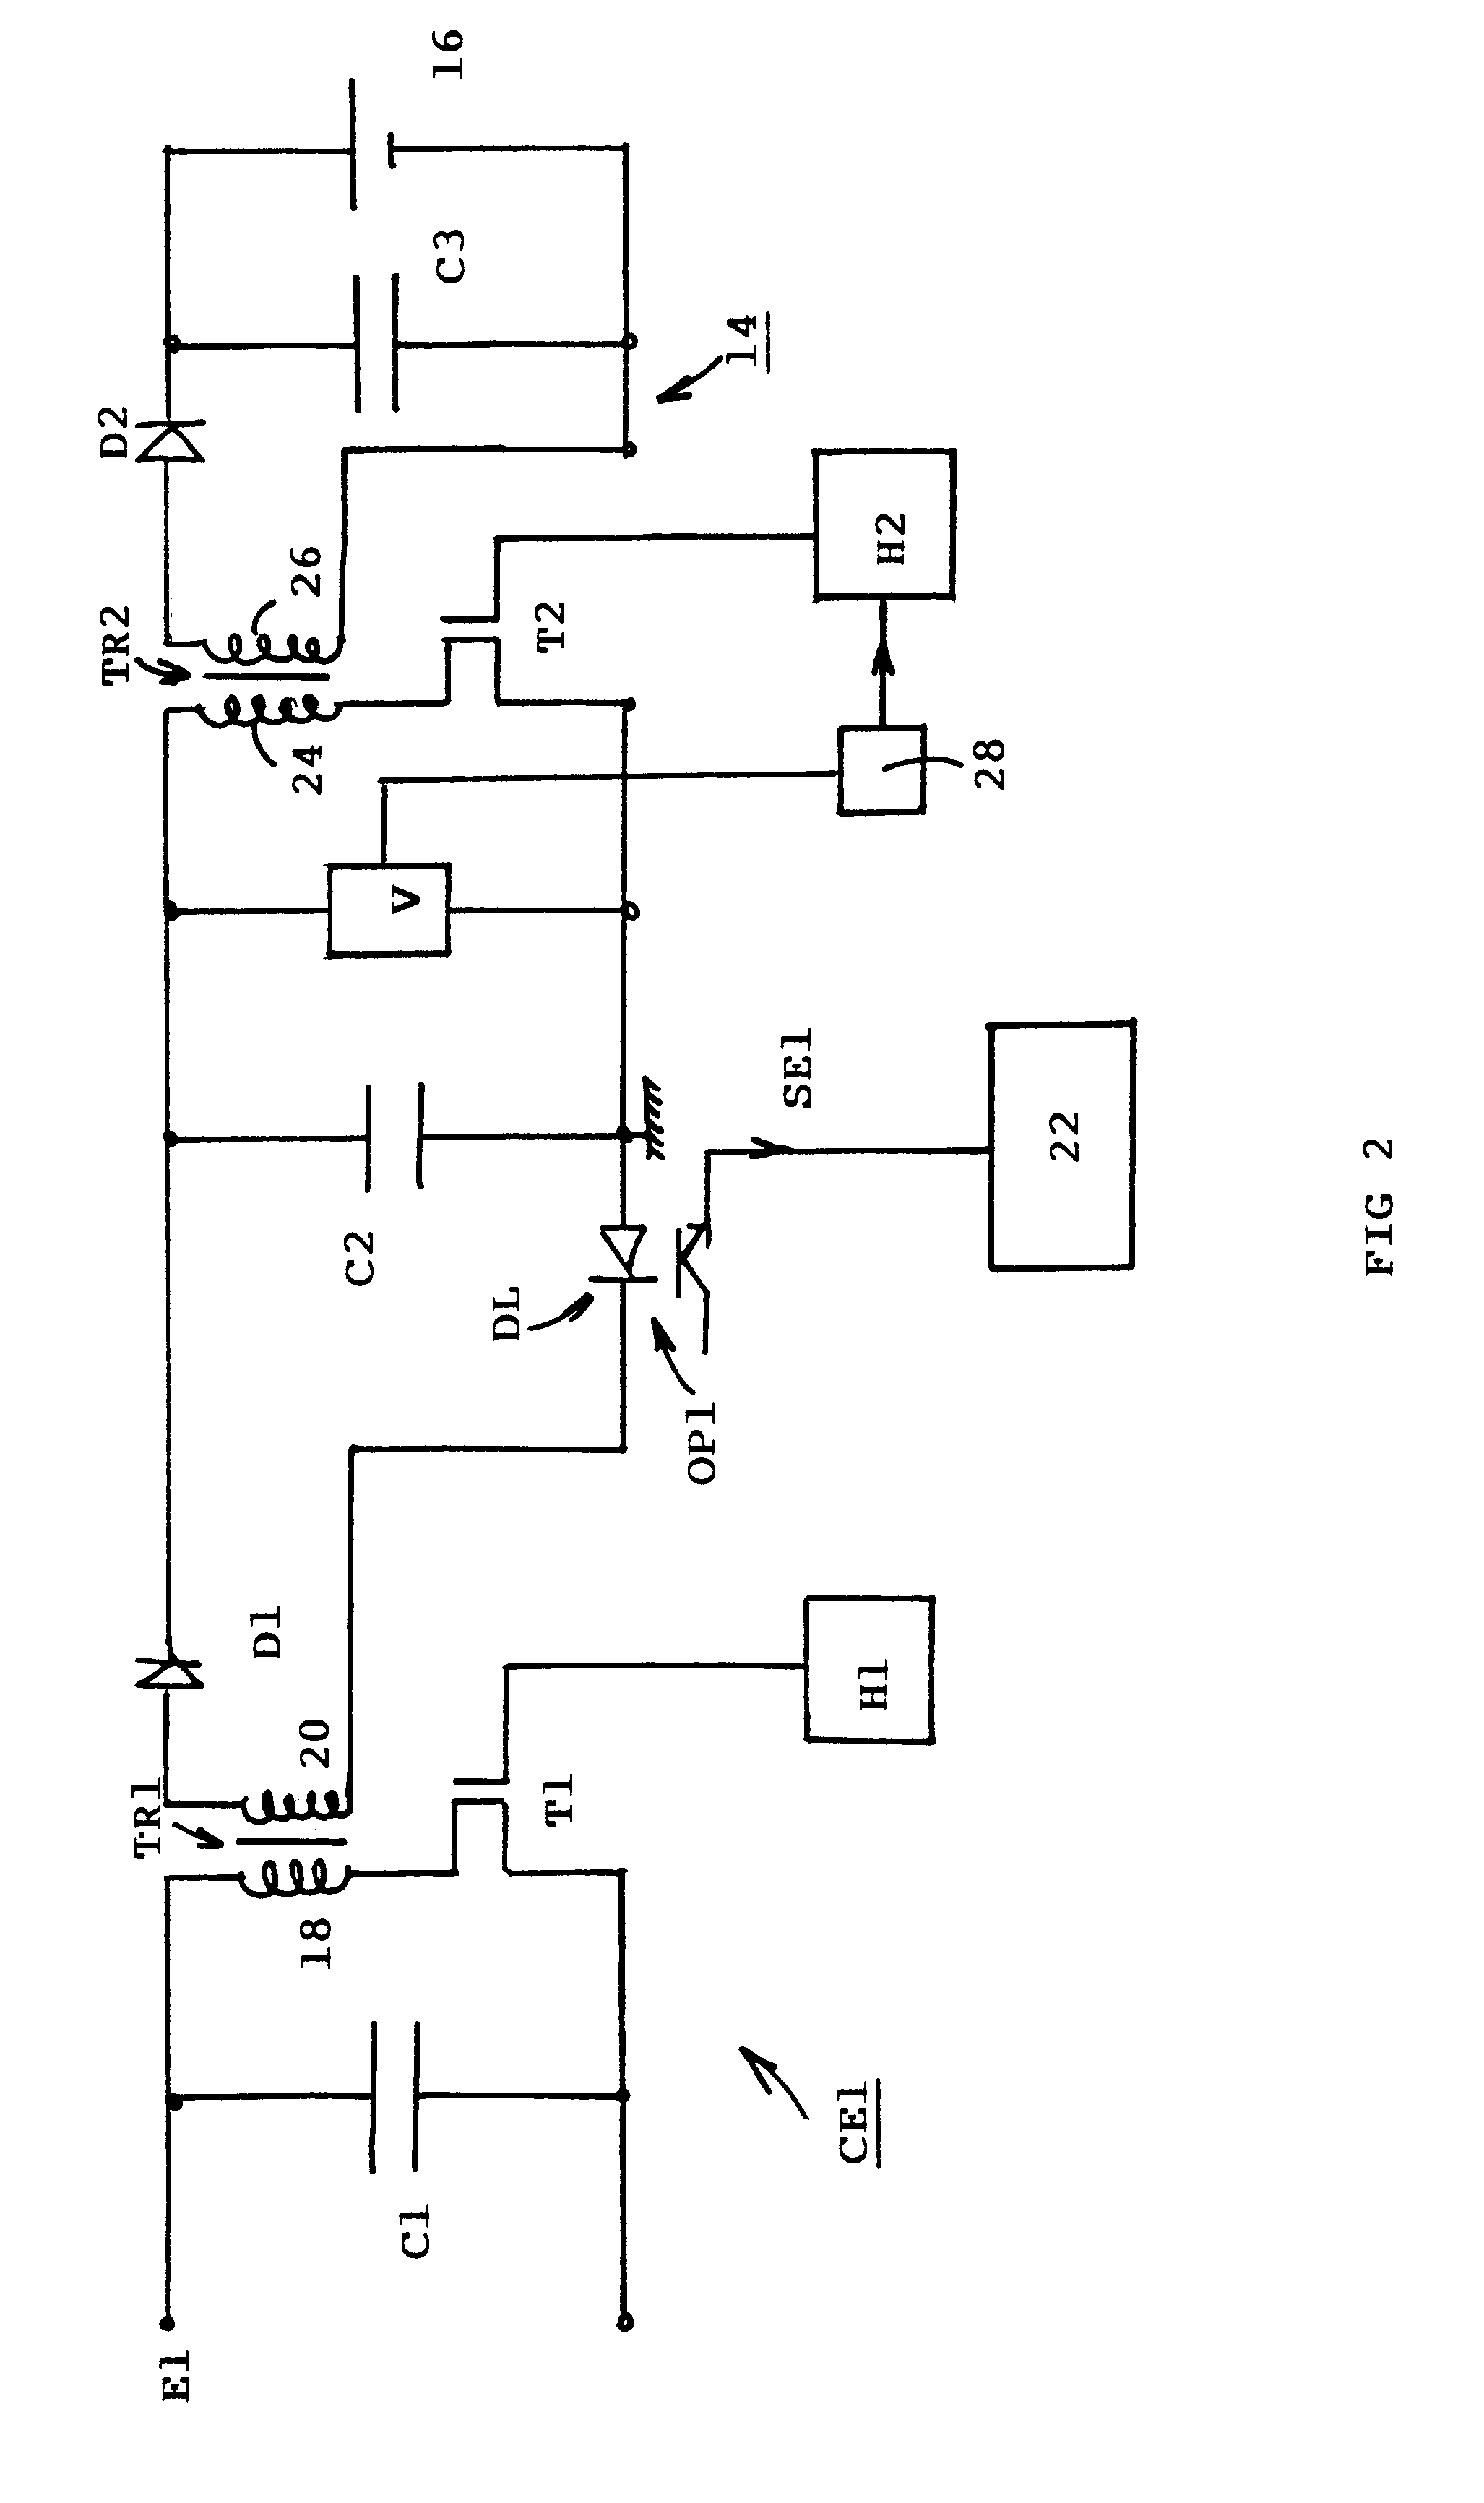 Logic input device with energy recovery for an industrial automatic control system